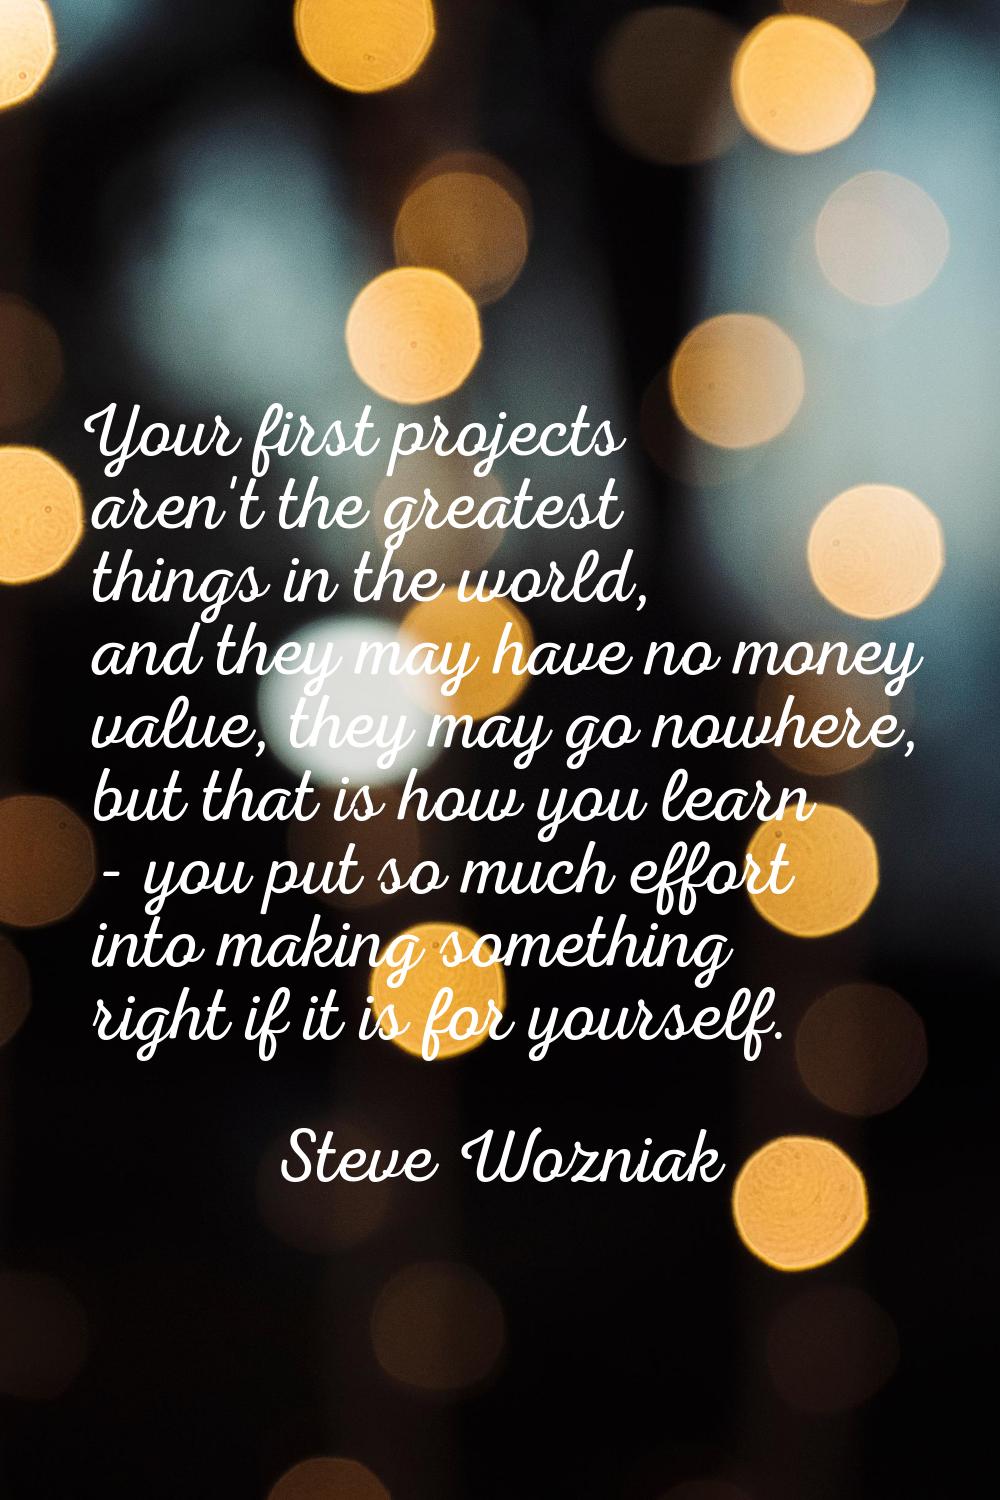 Your first projects aren't the greatest things in the world, and they may have no money value, they